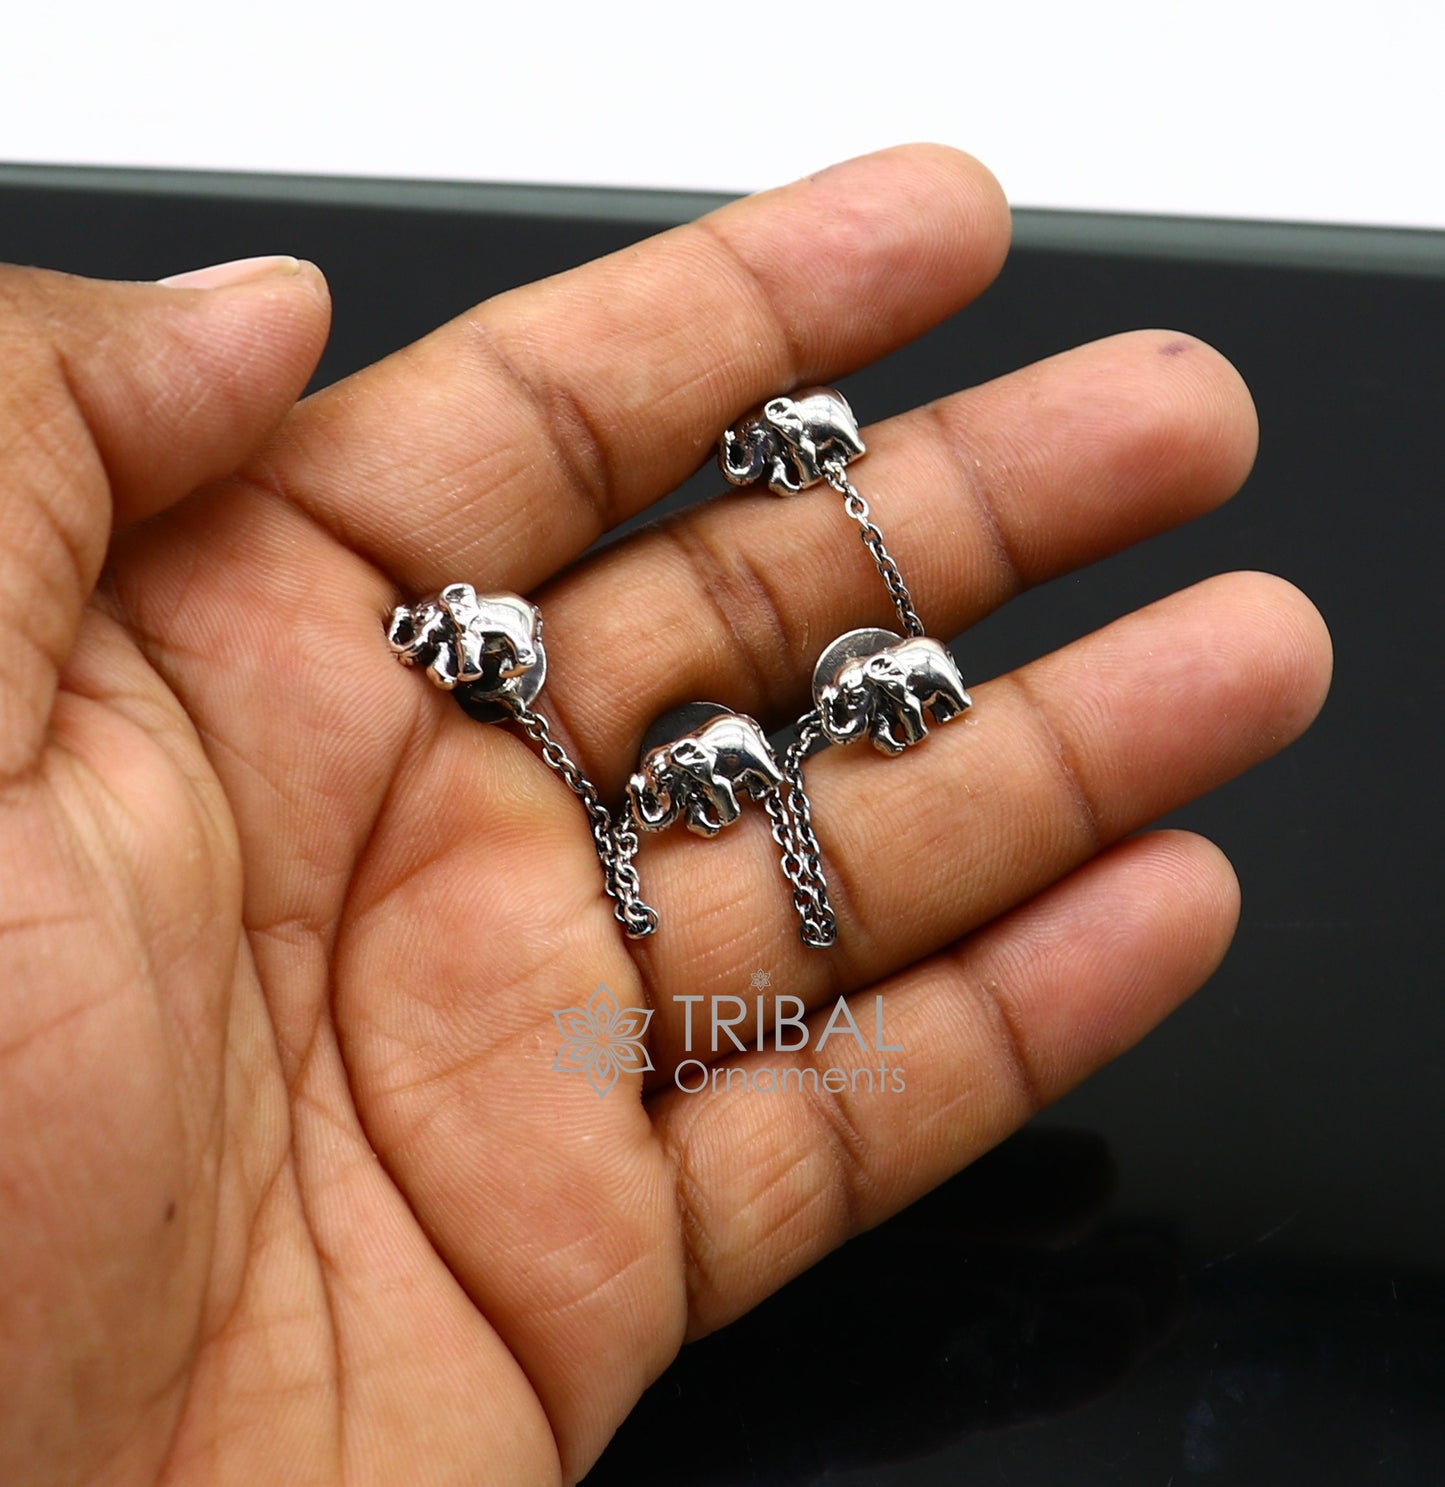 925 Sterling silver handmade amazing unique elephant shape ethnic style design buttons for men's kurta, best gifting accessories btn31 - TRIBAL ORNAMENTS